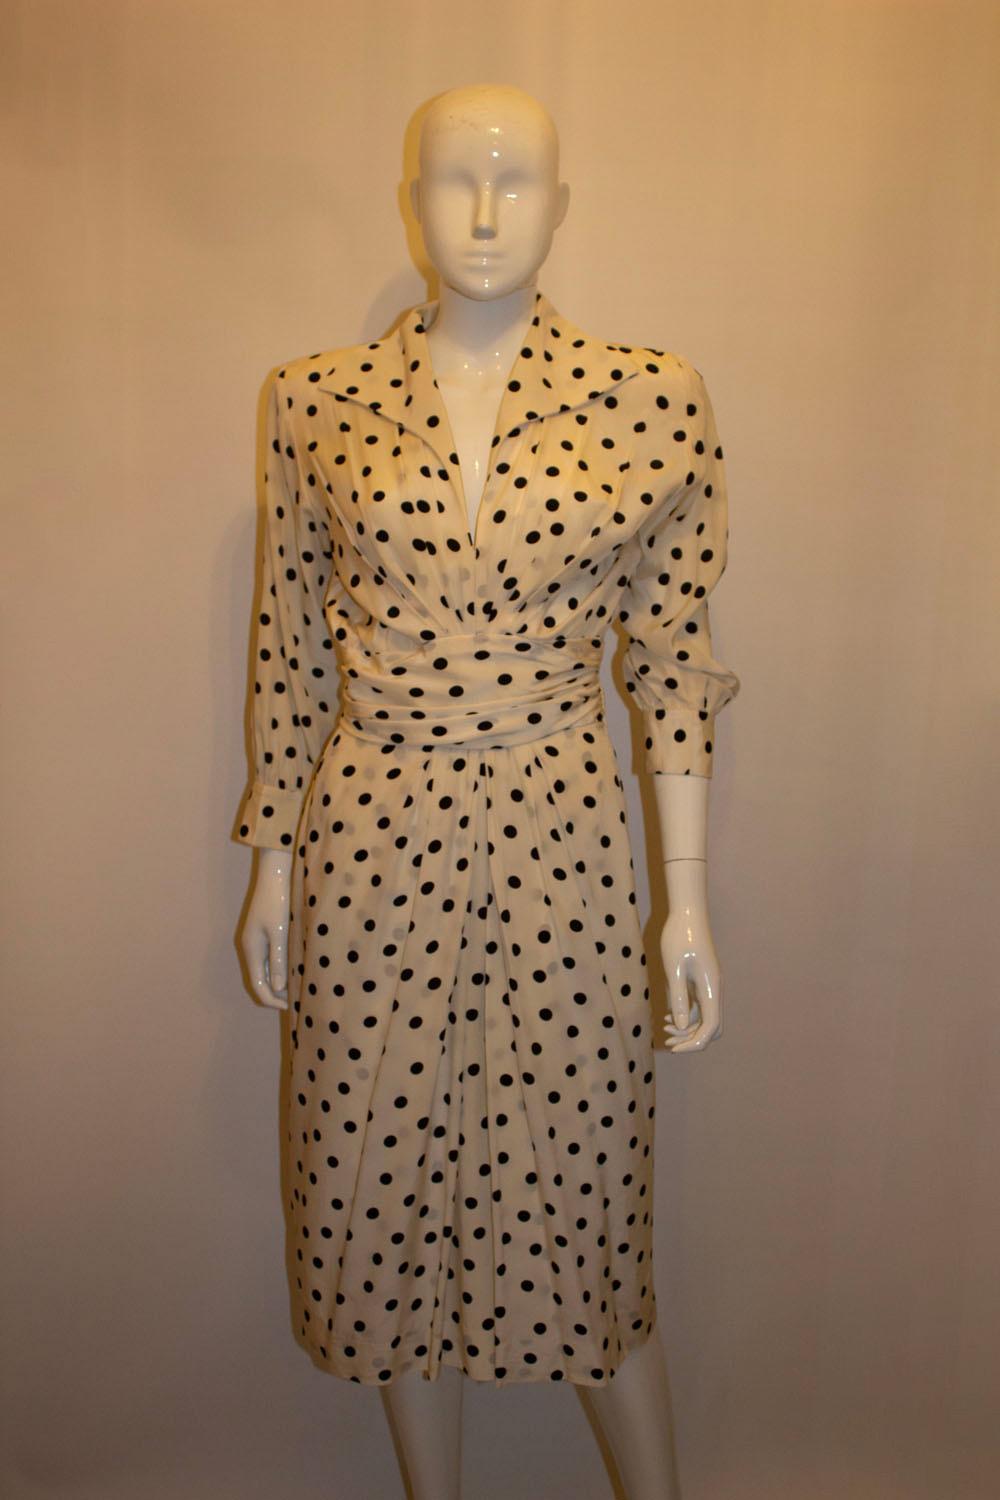 A super vintage silk dress b Yves Saint Laurent Rive Gauche. The dress is in white sil with black spot print. It has a v neckline, the original shoulder pads ( could be removed), and a pocket on either side .
Made in France , Size 40 
Measurements: